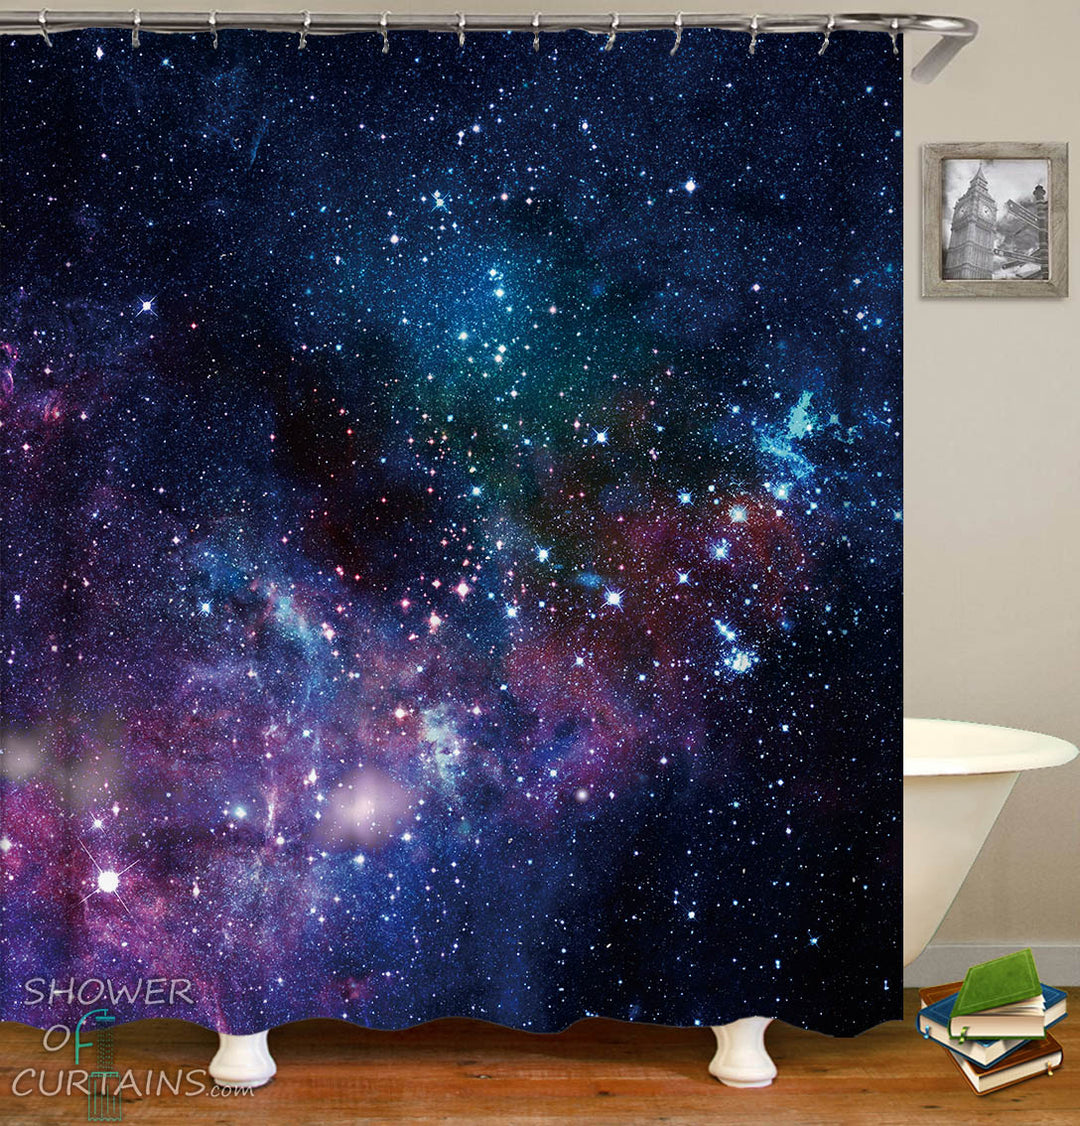 The Space Shower Curtain